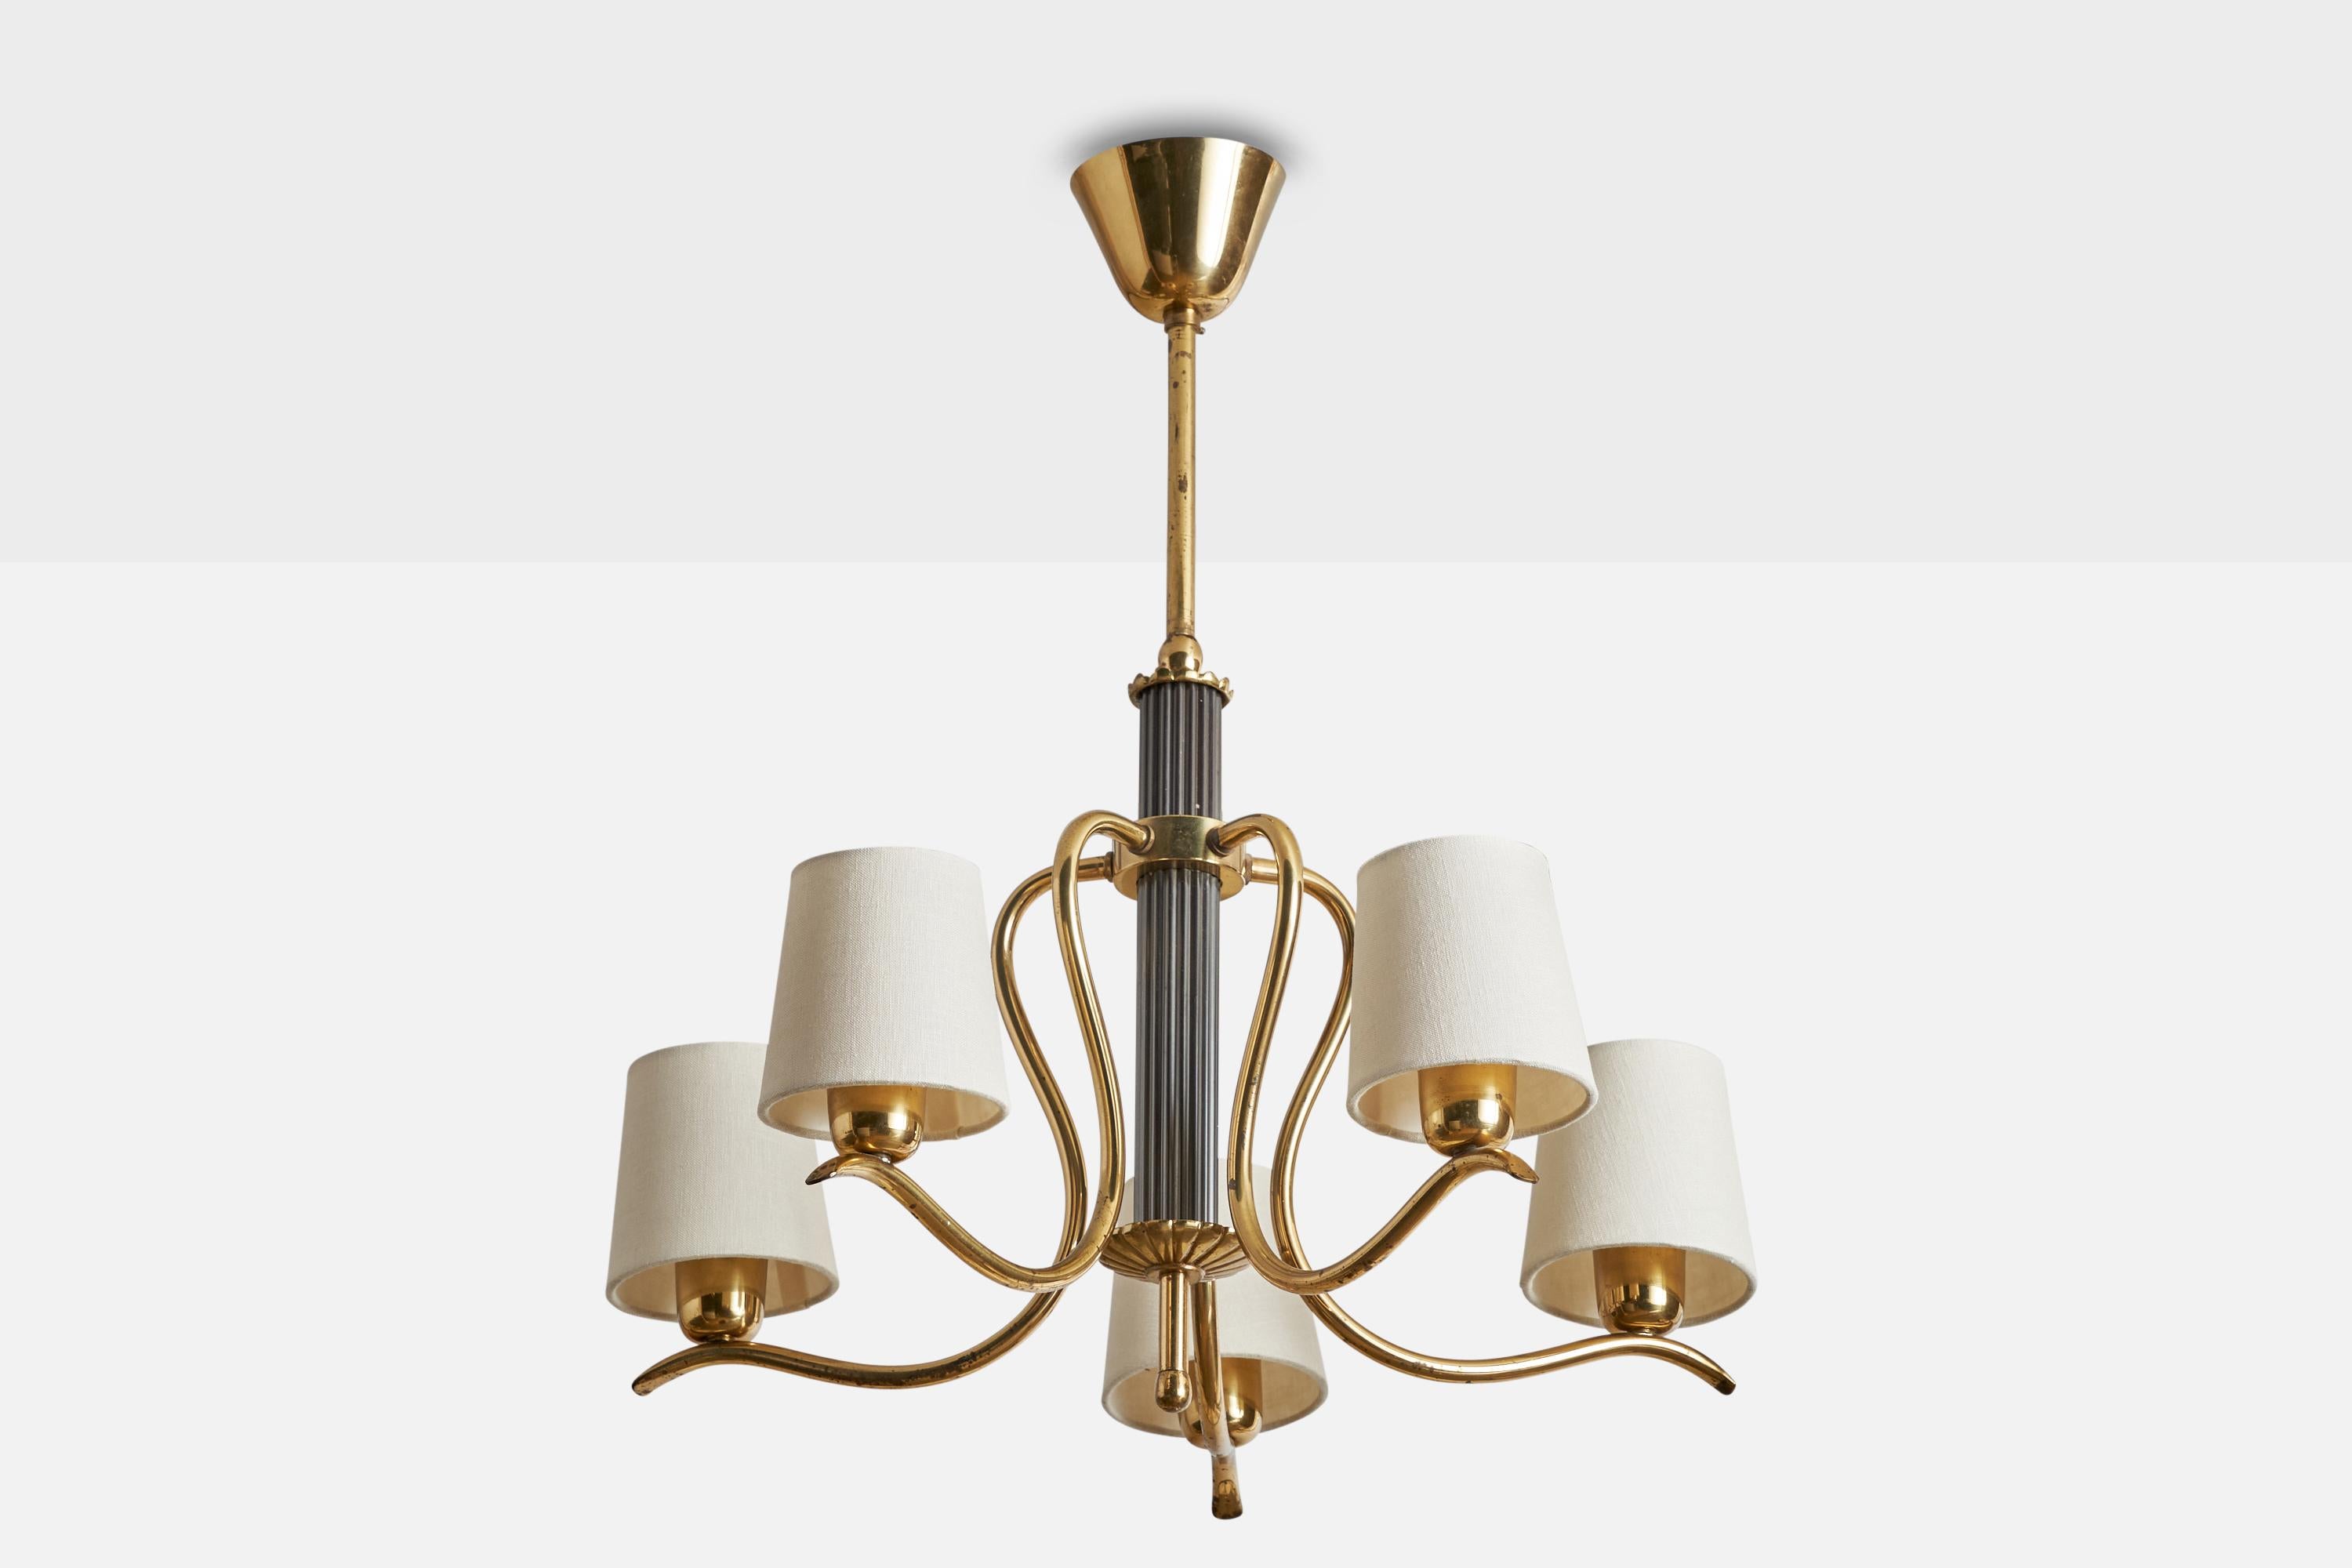 A brass and metal chandelier designed and produced in Sweden, c. 1940s.

Dimensions of canopy (inches): 2.5” H x 3.5” Diameter
Socket takes standard E-26 bulbs. 5 sockets.There is no maximum wattage stated on the fixture. All lighting will be